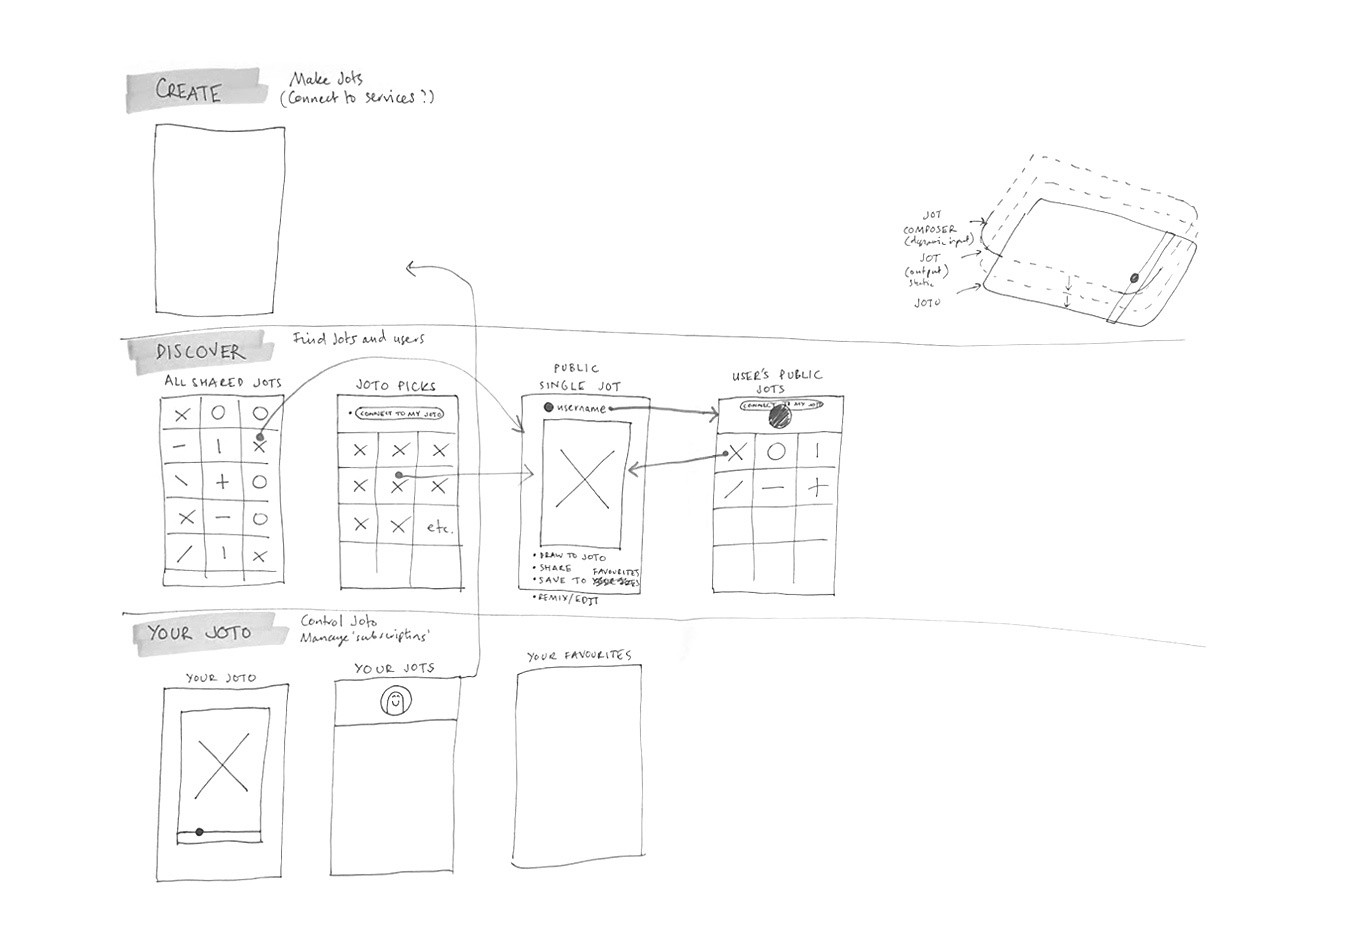 Joto mapping and wireframing